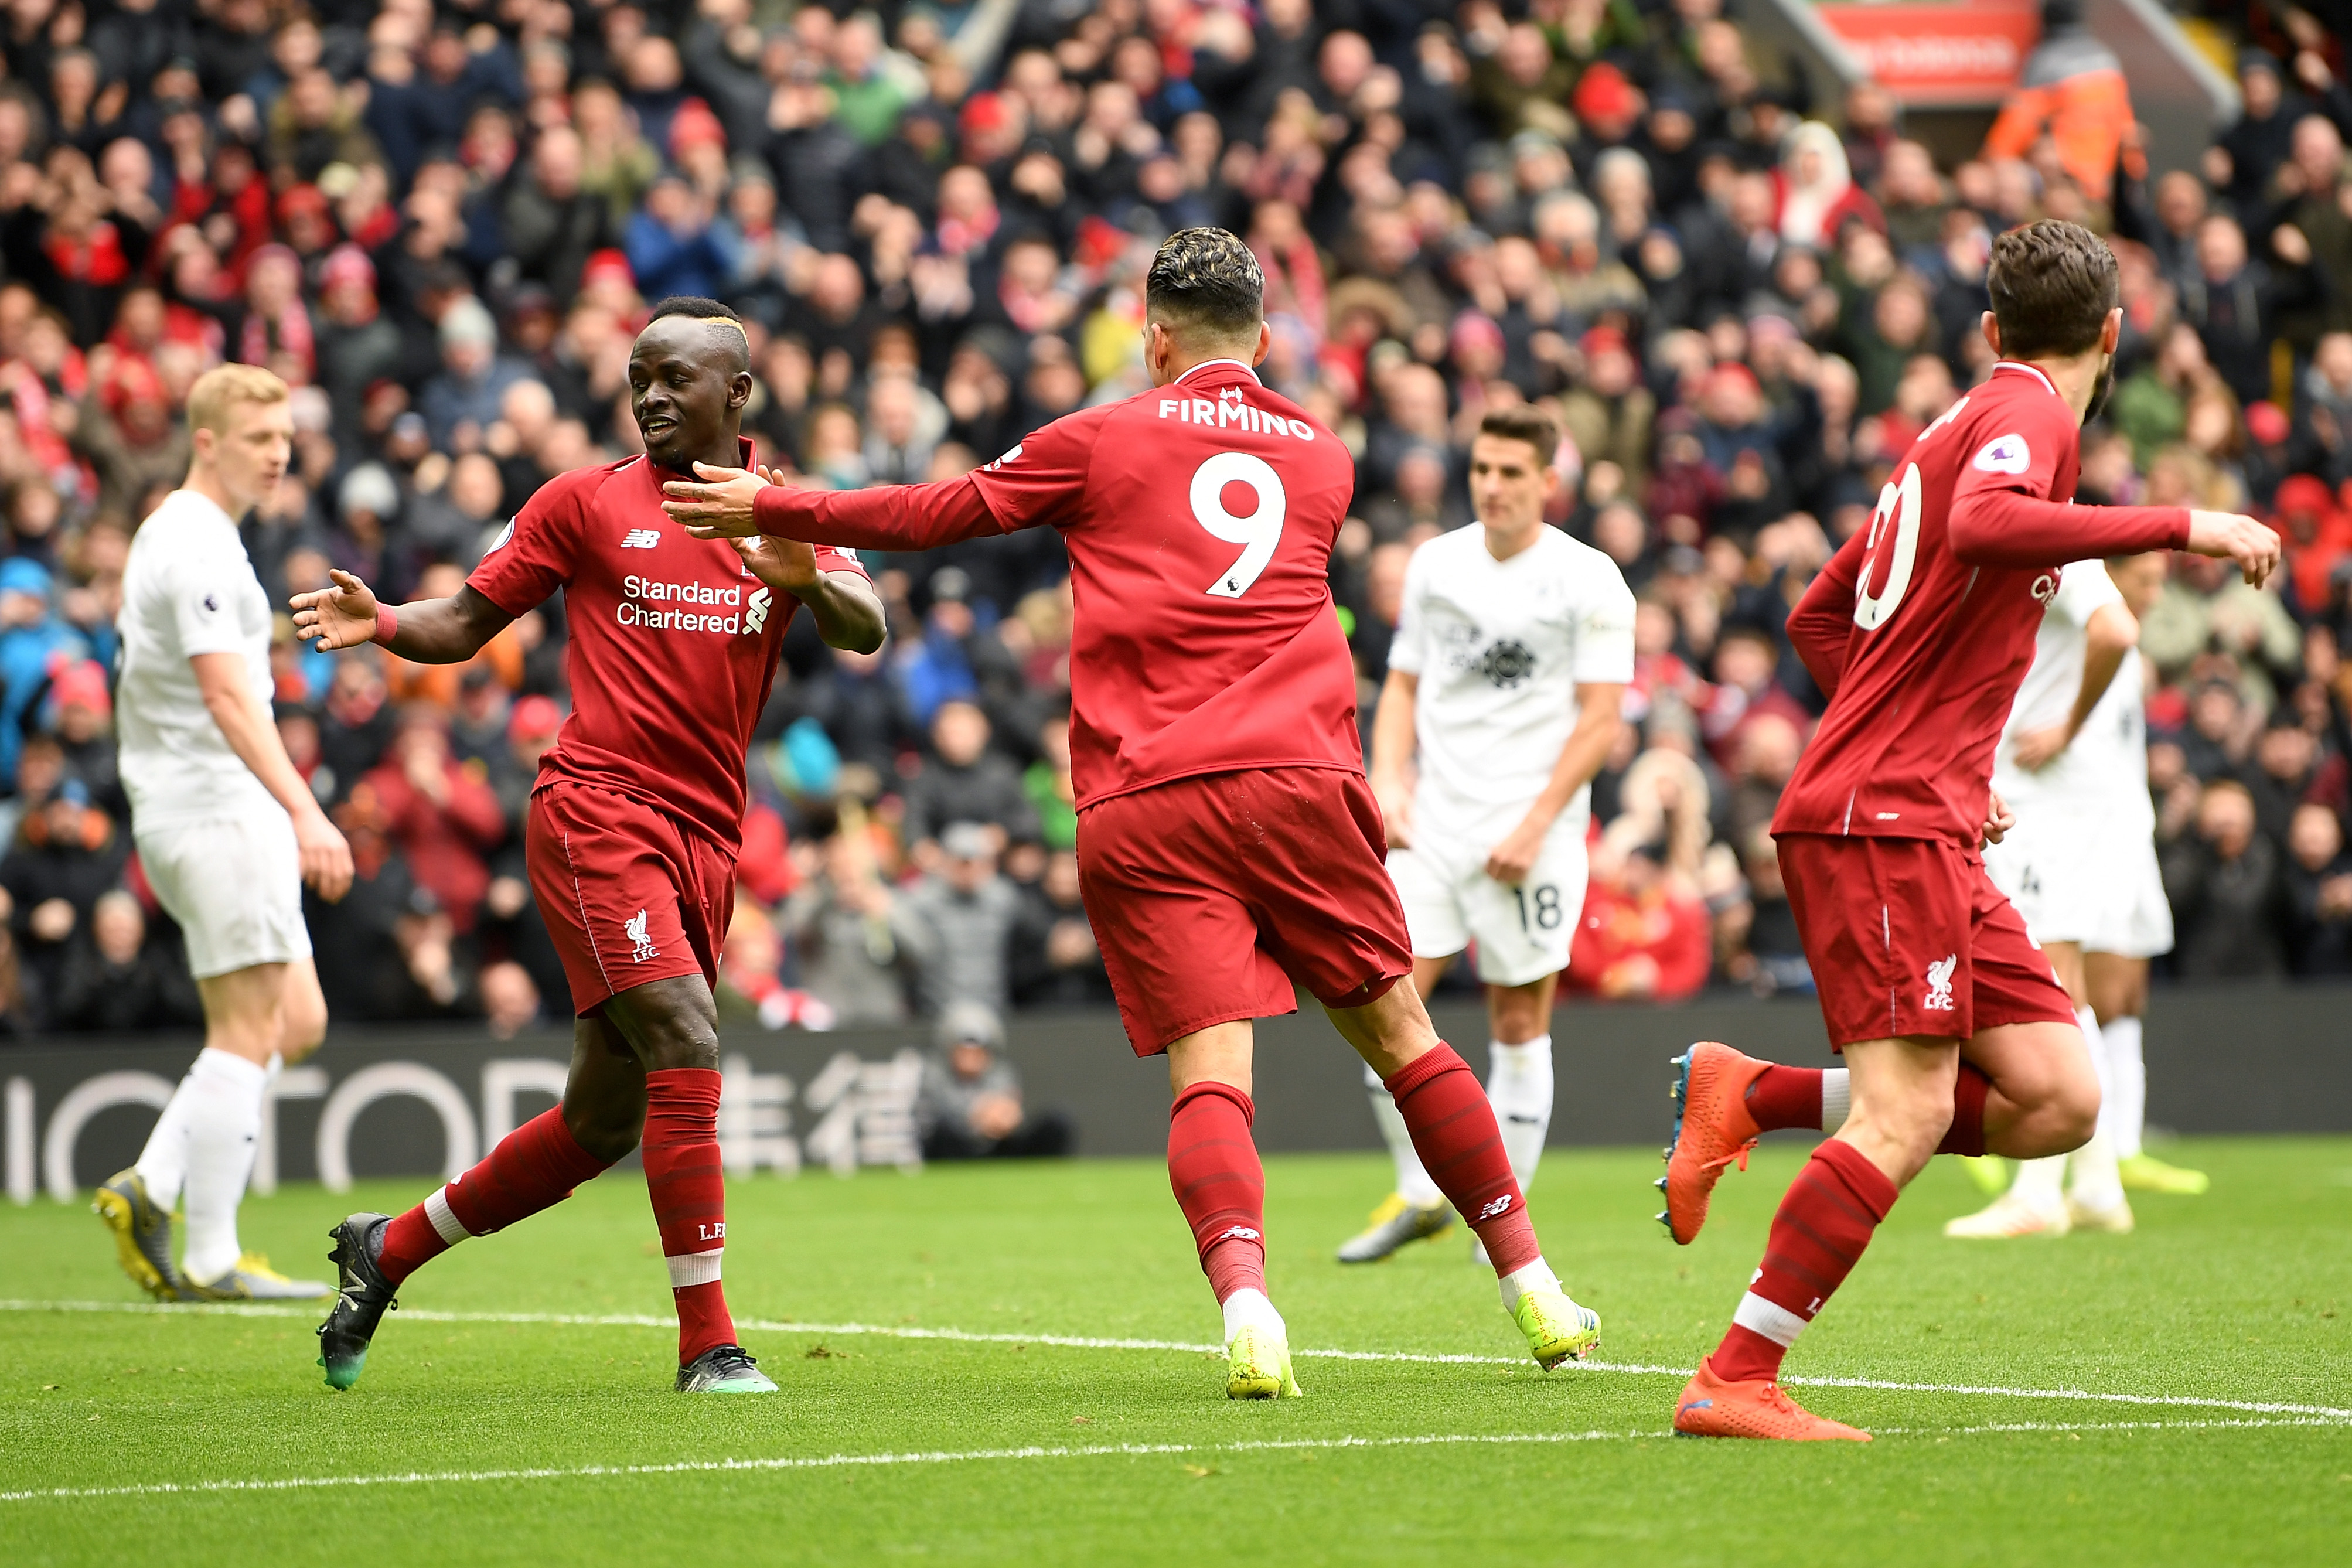 LIVERPOOL, ENGLAND - MARCH 10: Roberto Firmino of Liverpool celebrates with Sadio Mane of Liverpool after scoring his sides first goal during the Premier League match between Liverpool FC and Burnley FC at Anfield on March 10, 2019 in Liverpool, United Kingdom. (Photo by Michael Regan/Getty Images)